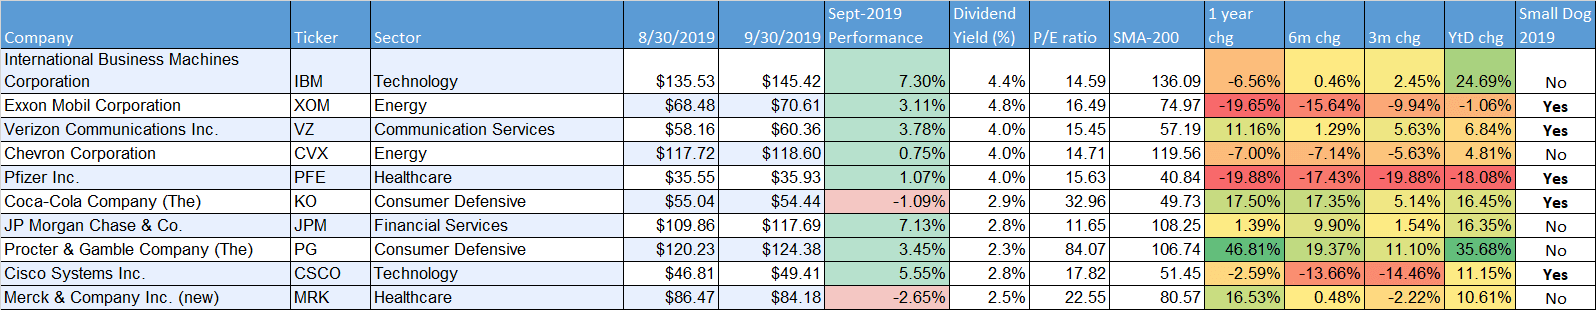 Dogs of the dow sept 2019 performance